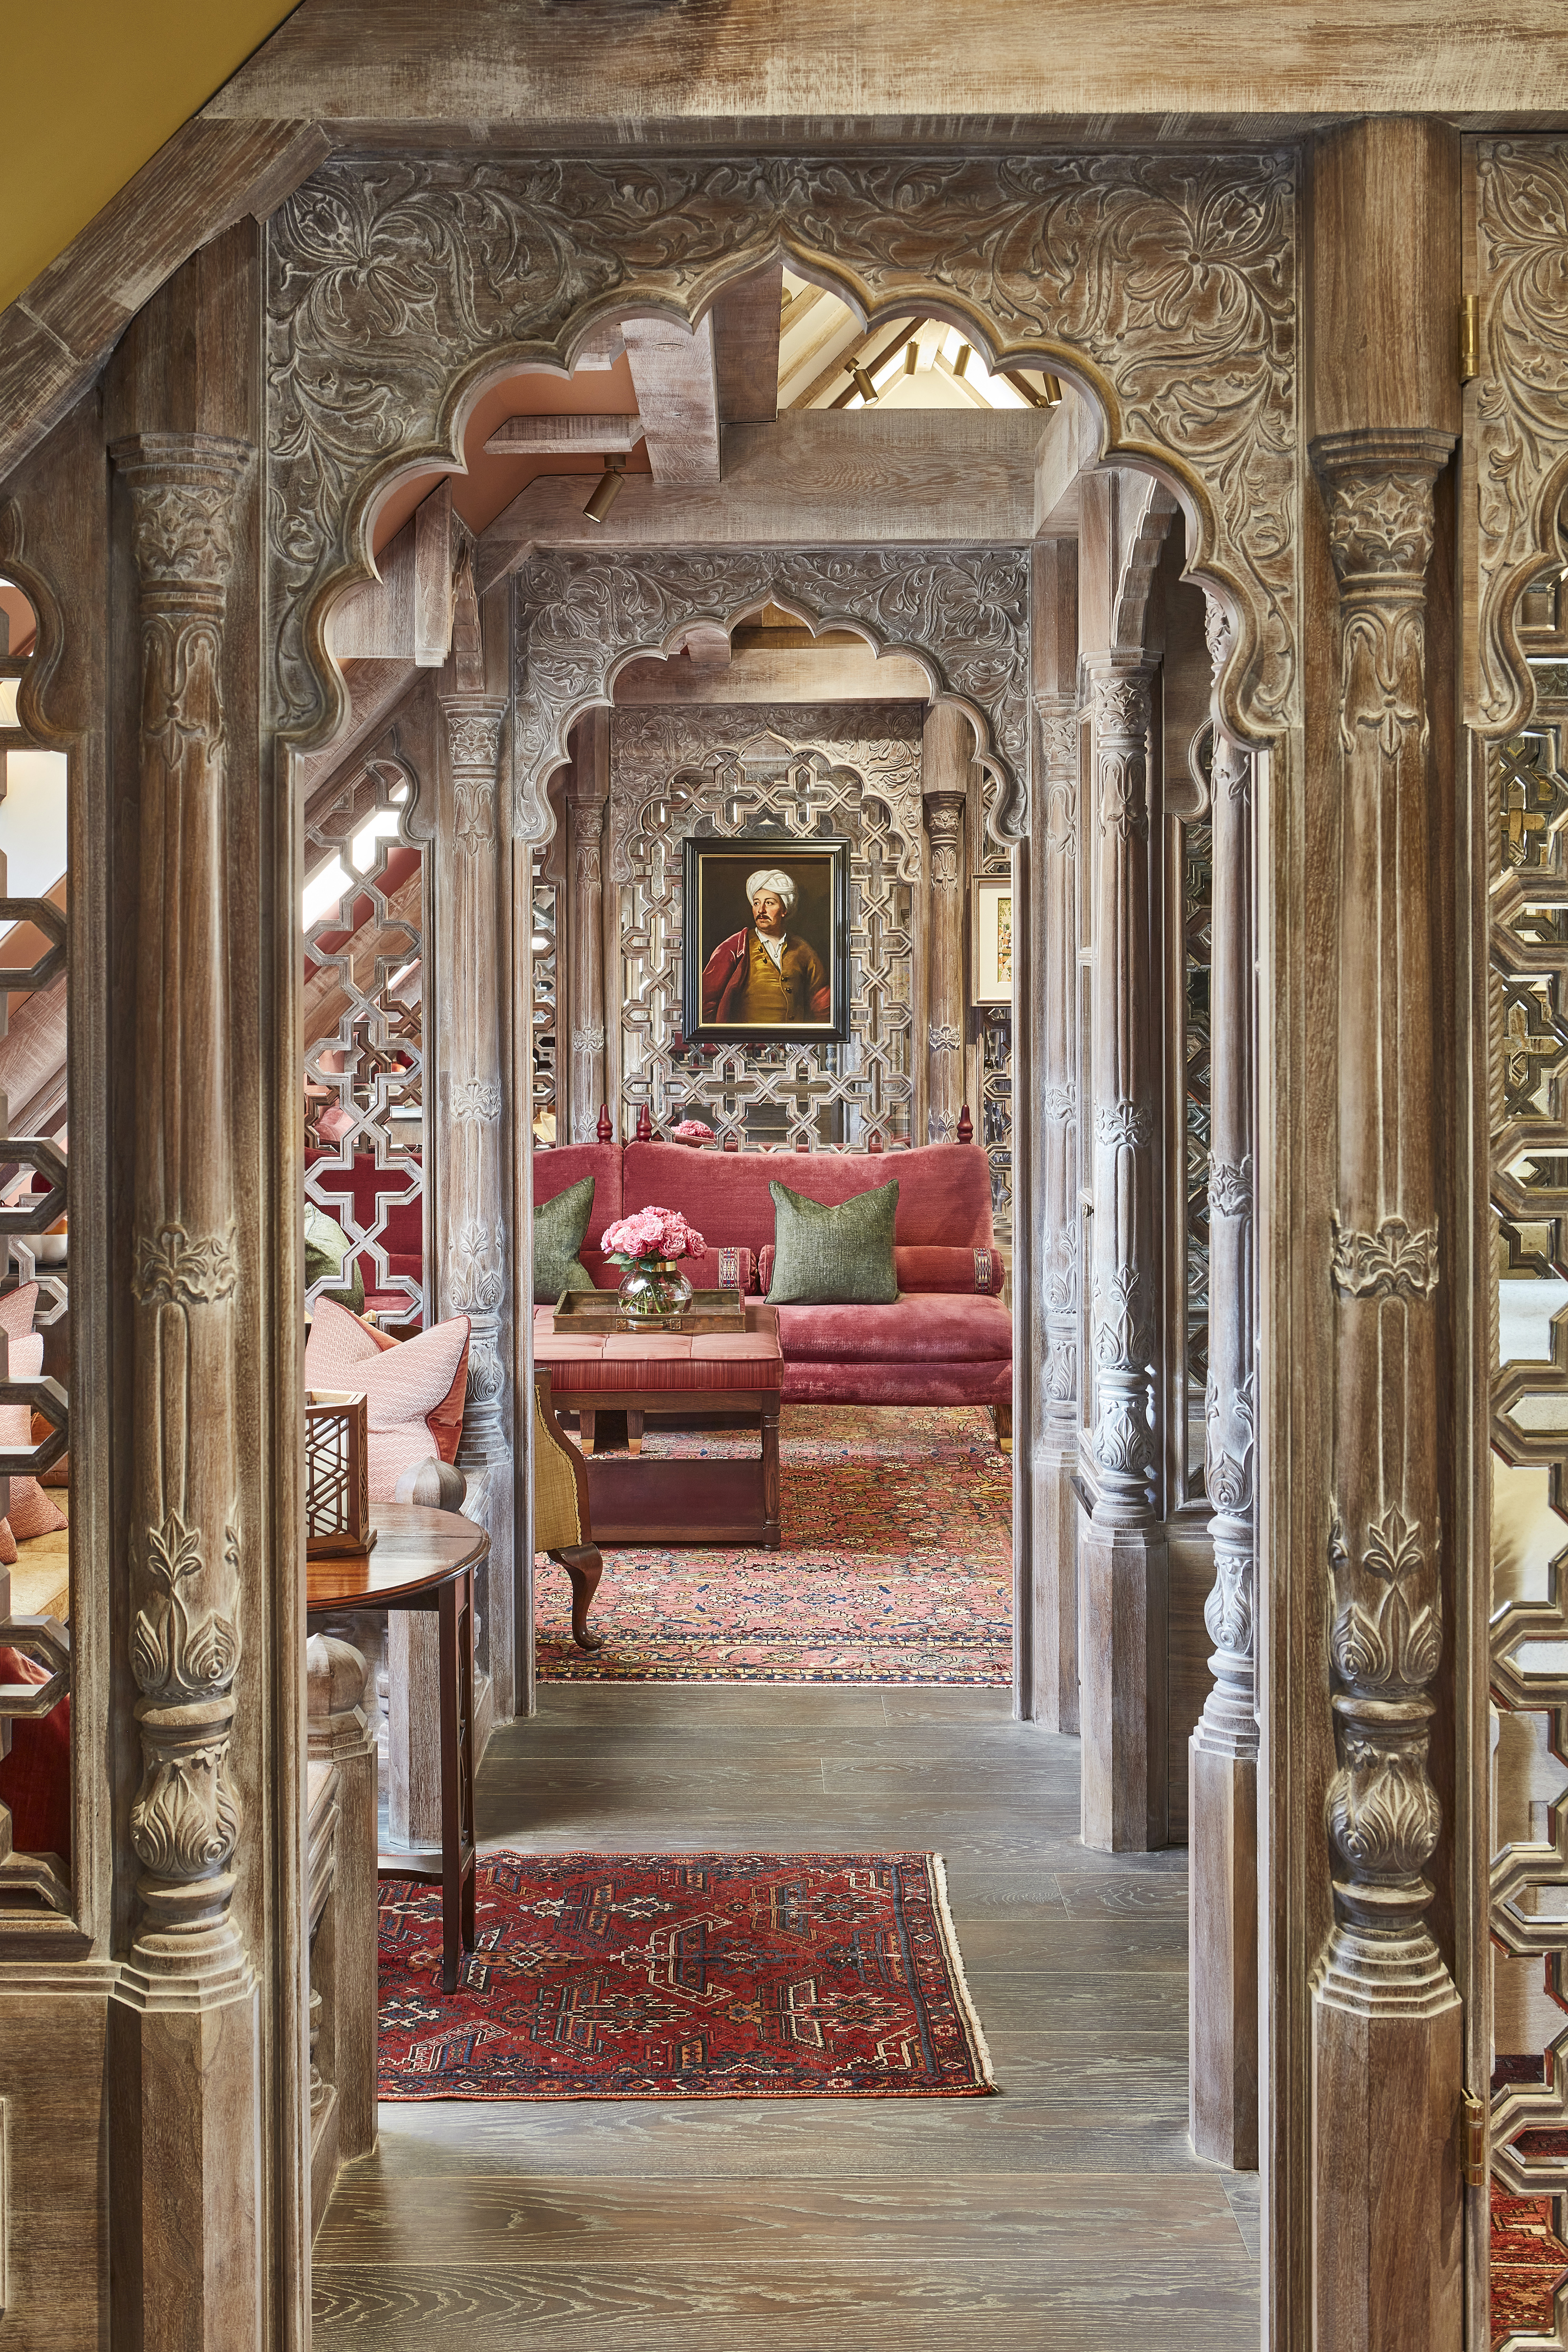 Furnishings include carpets from Afghanistan and Mogul portraits